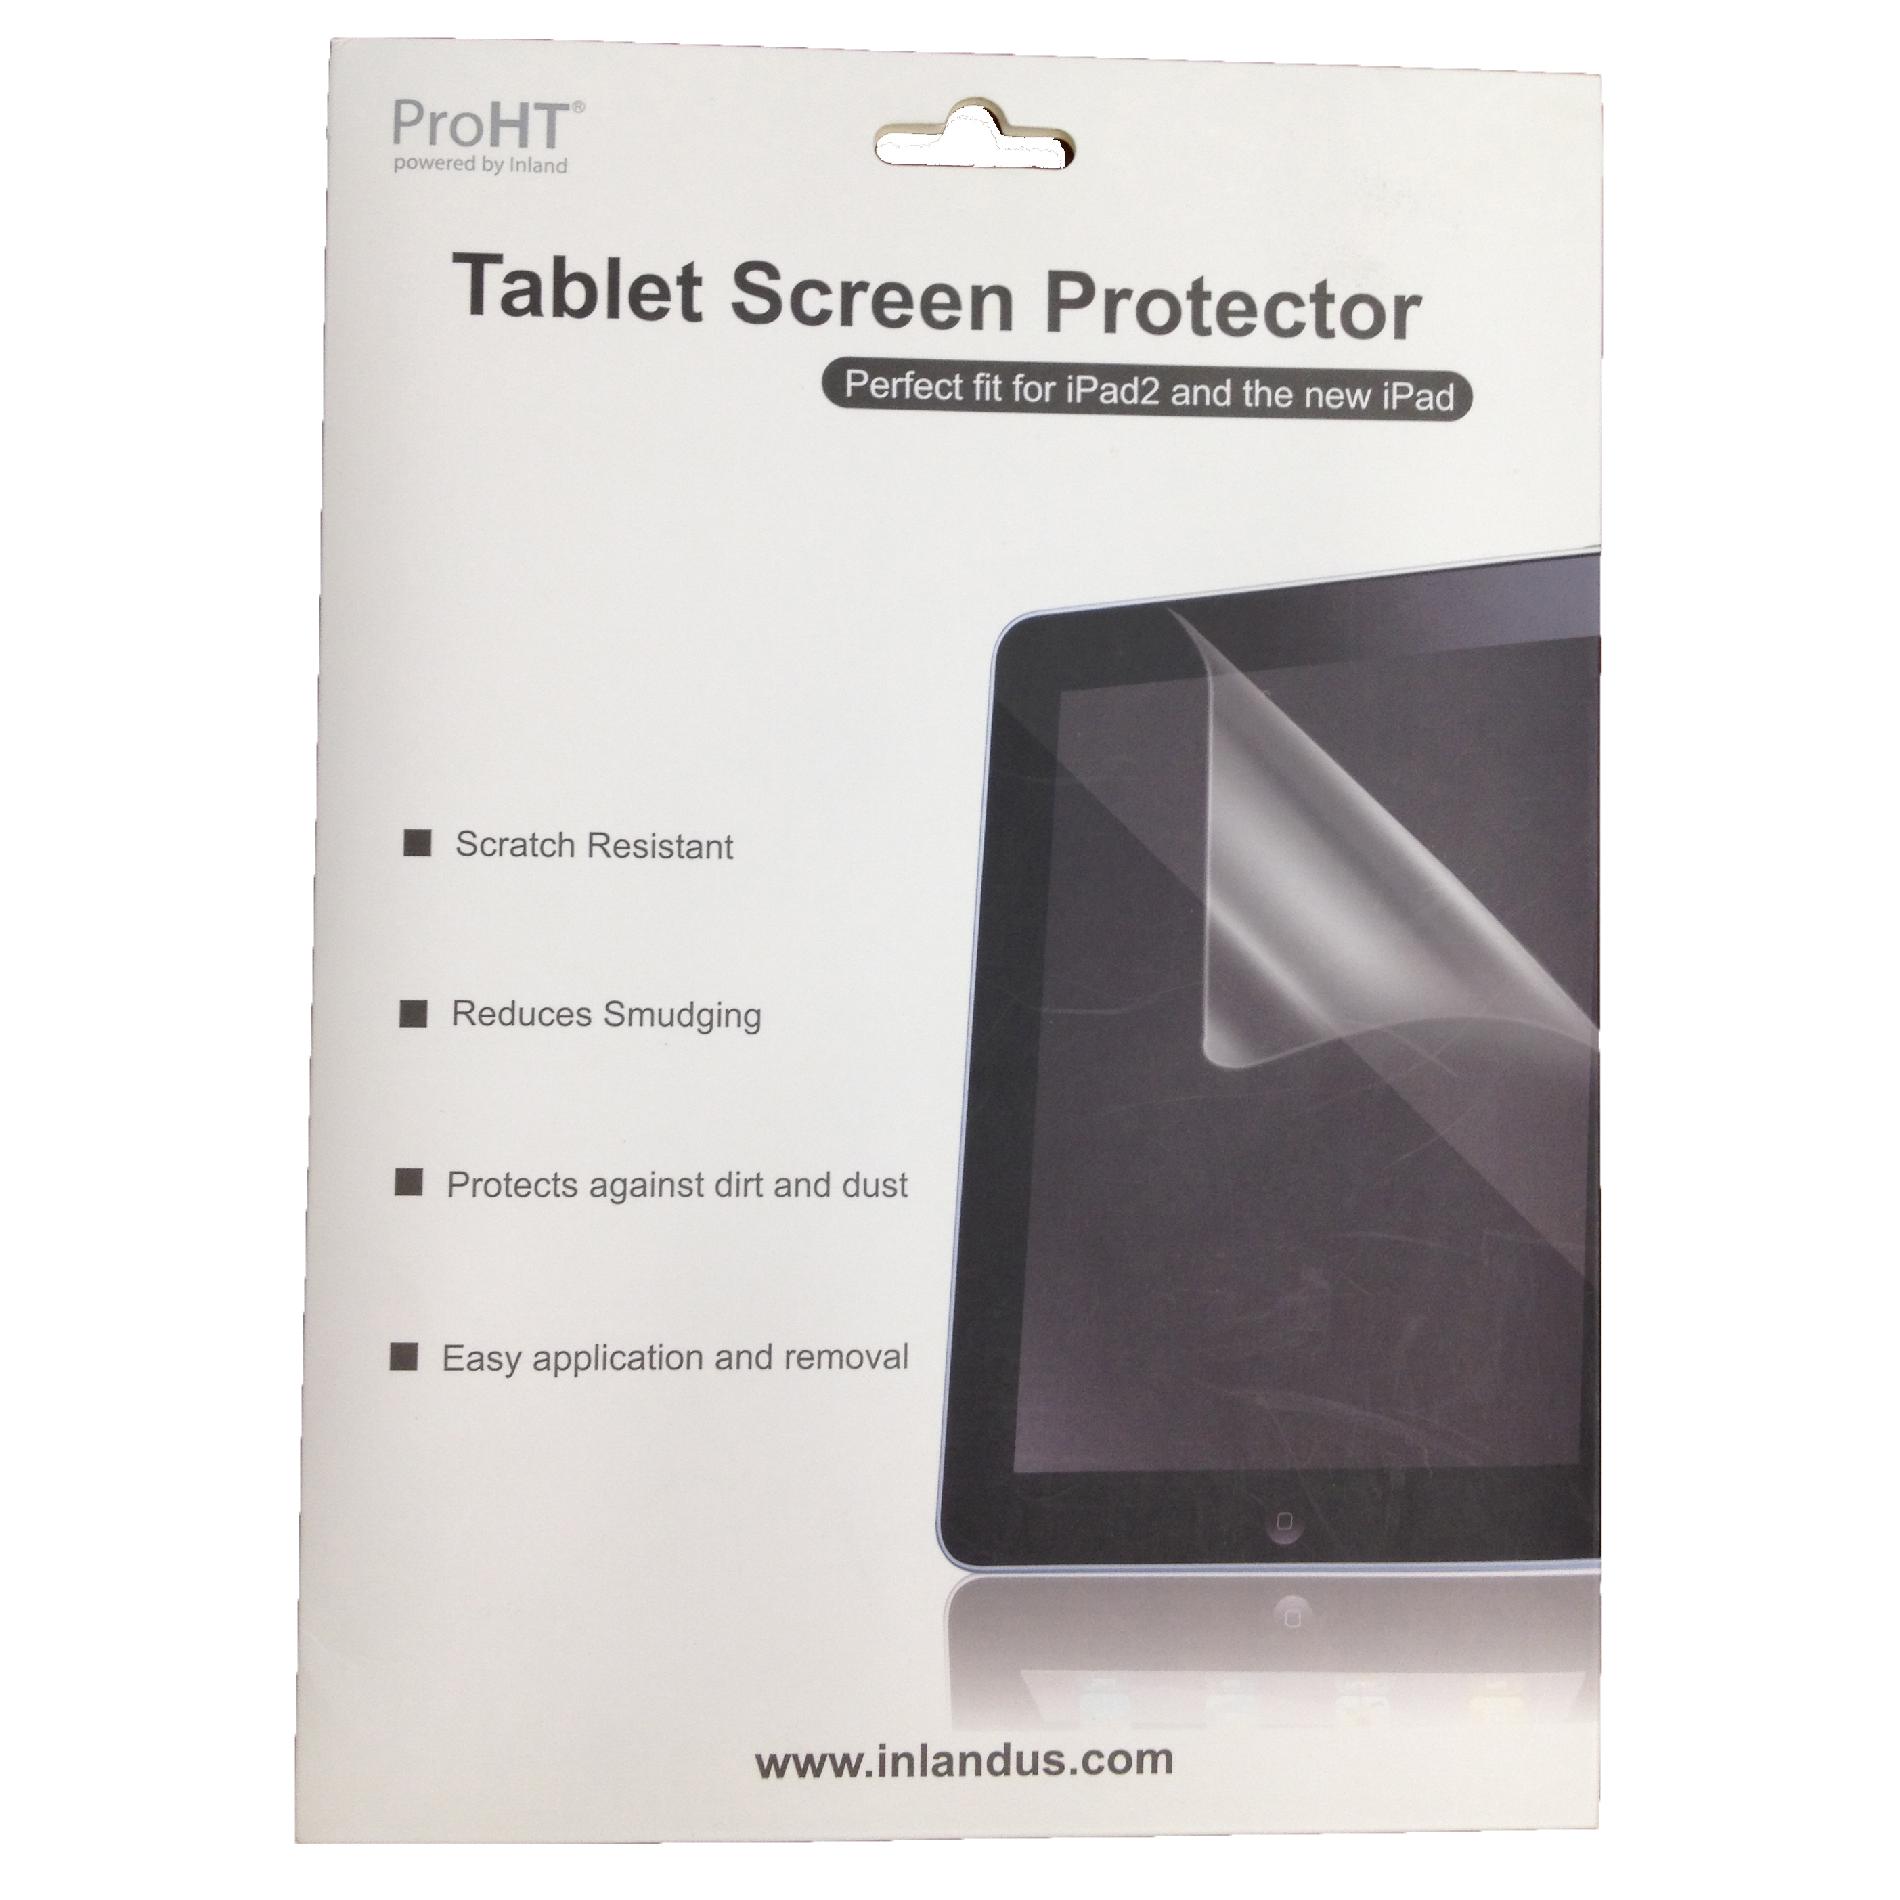 Tablet Screen Protector for New iPad and iPad 2, Clear